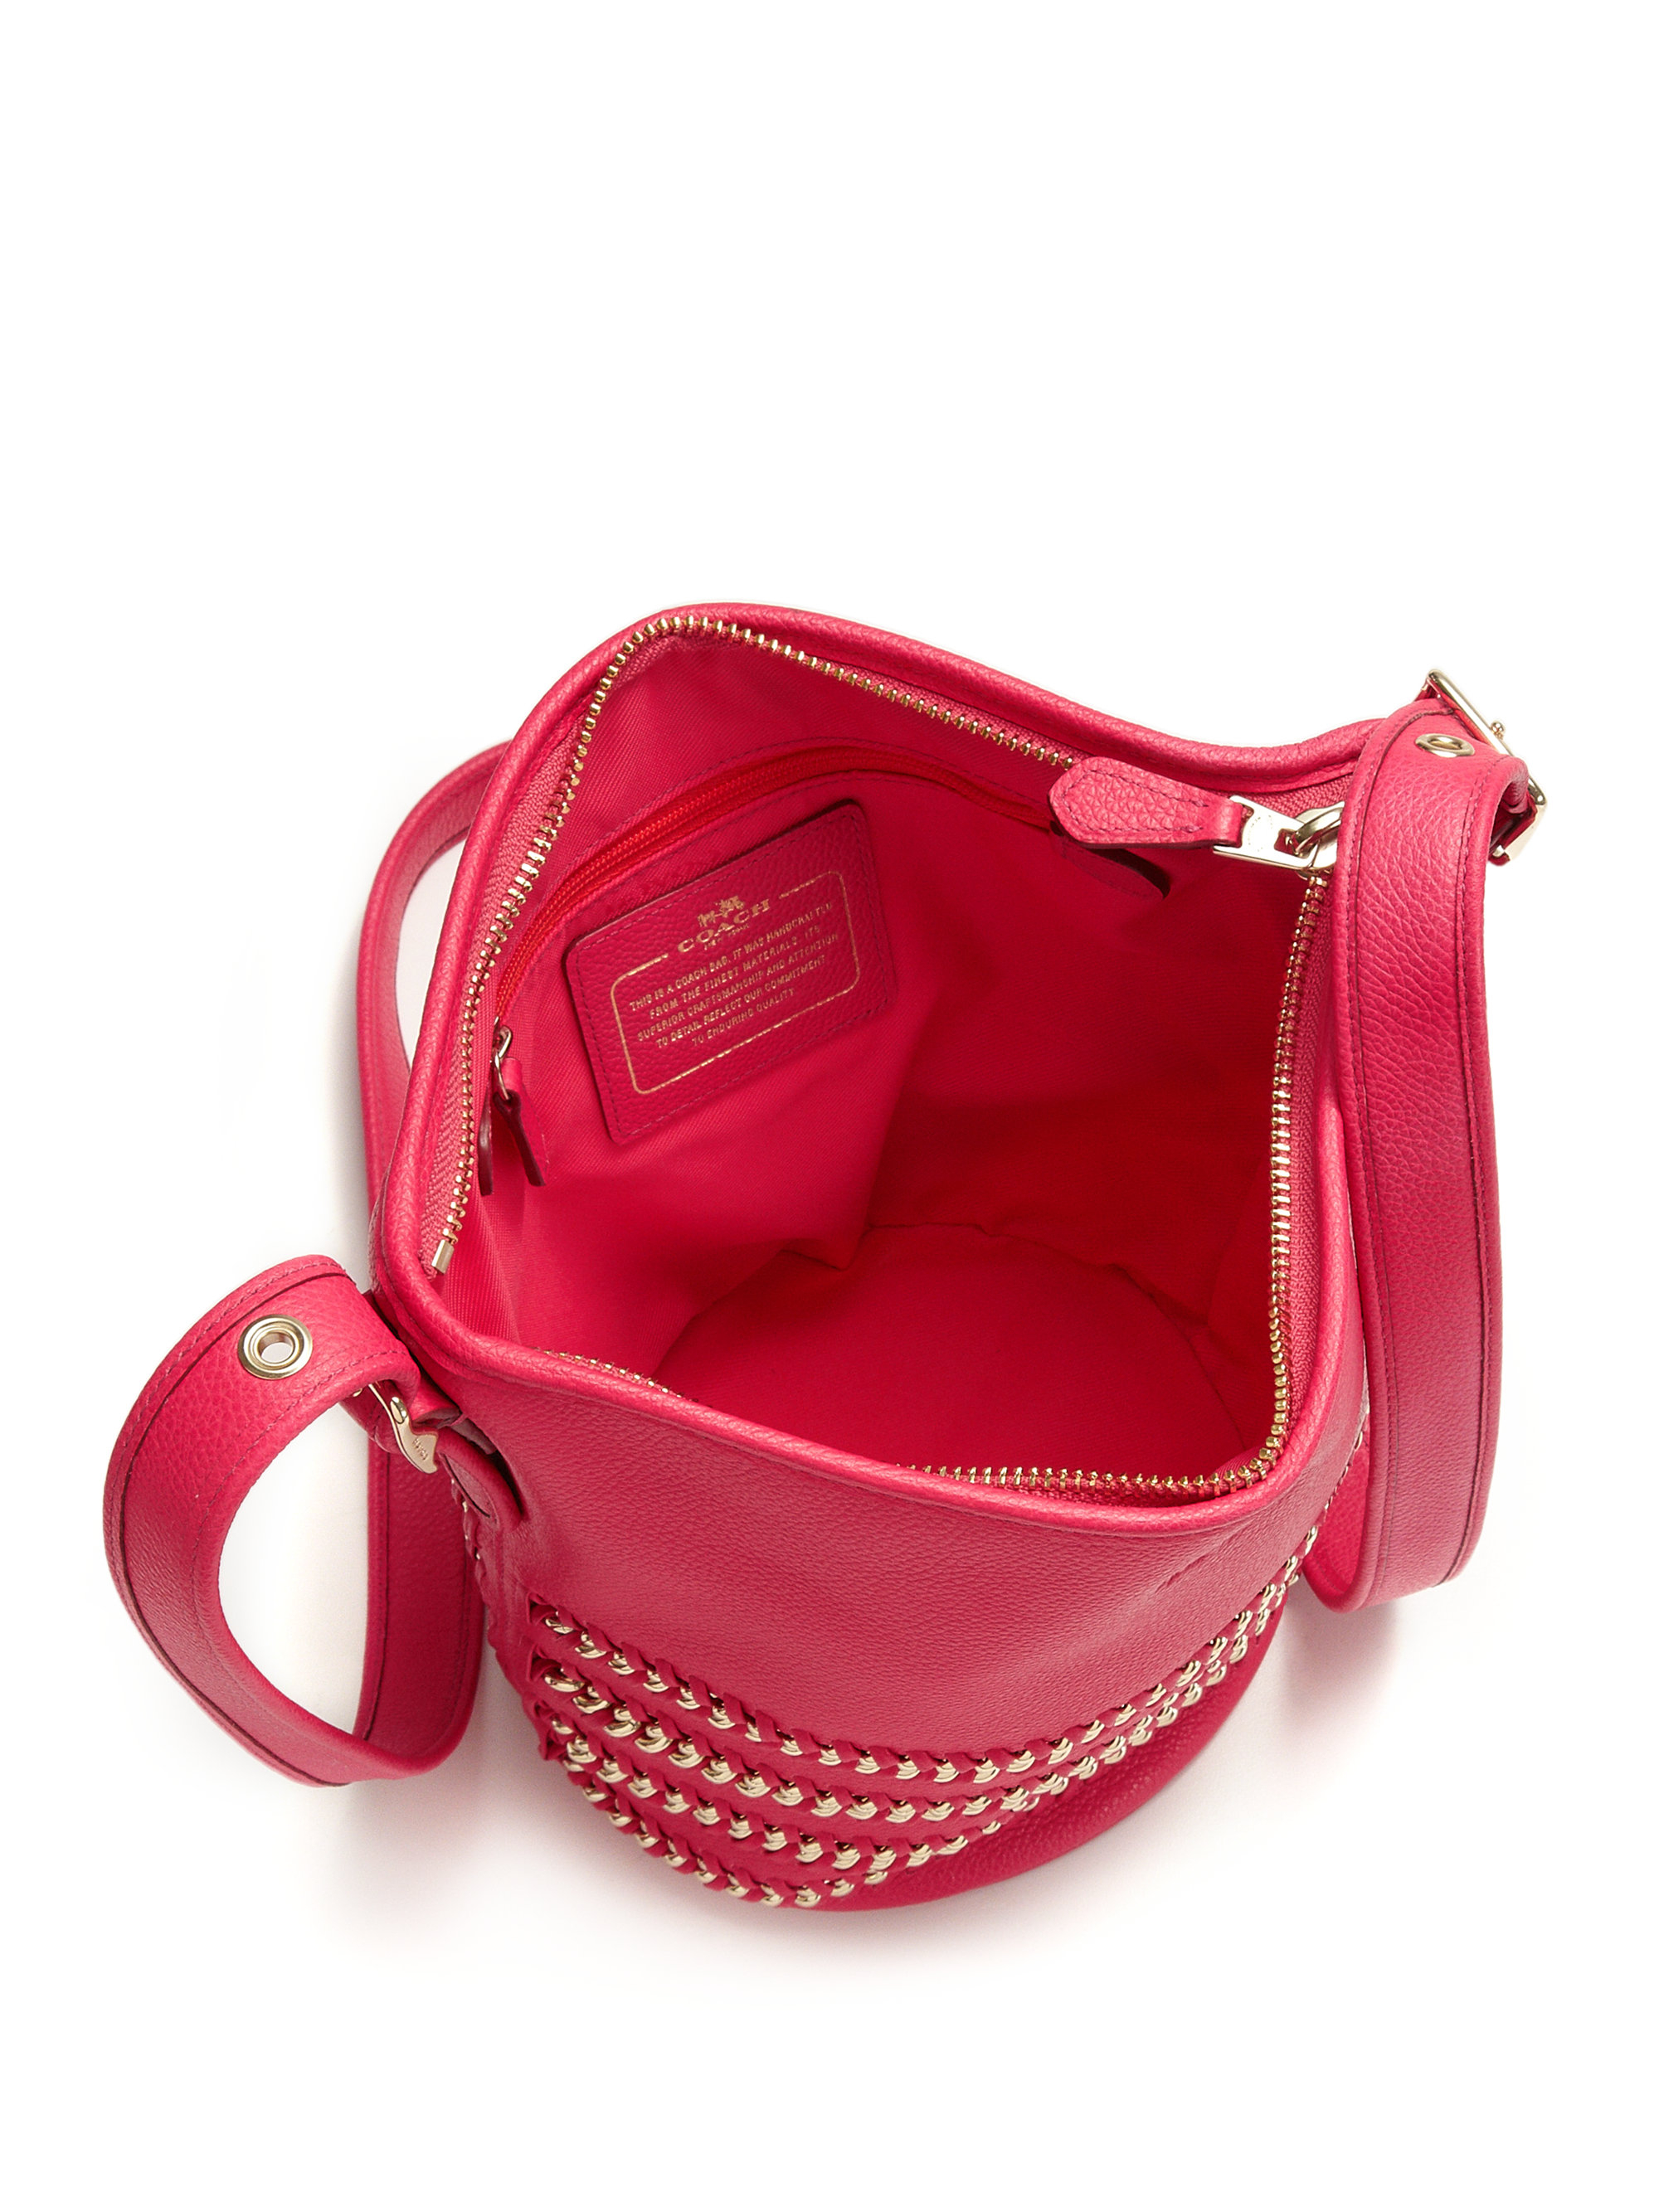 Lyst - Coach Mini Whipstitched & Chain-accented Crossbody Bag in Pink